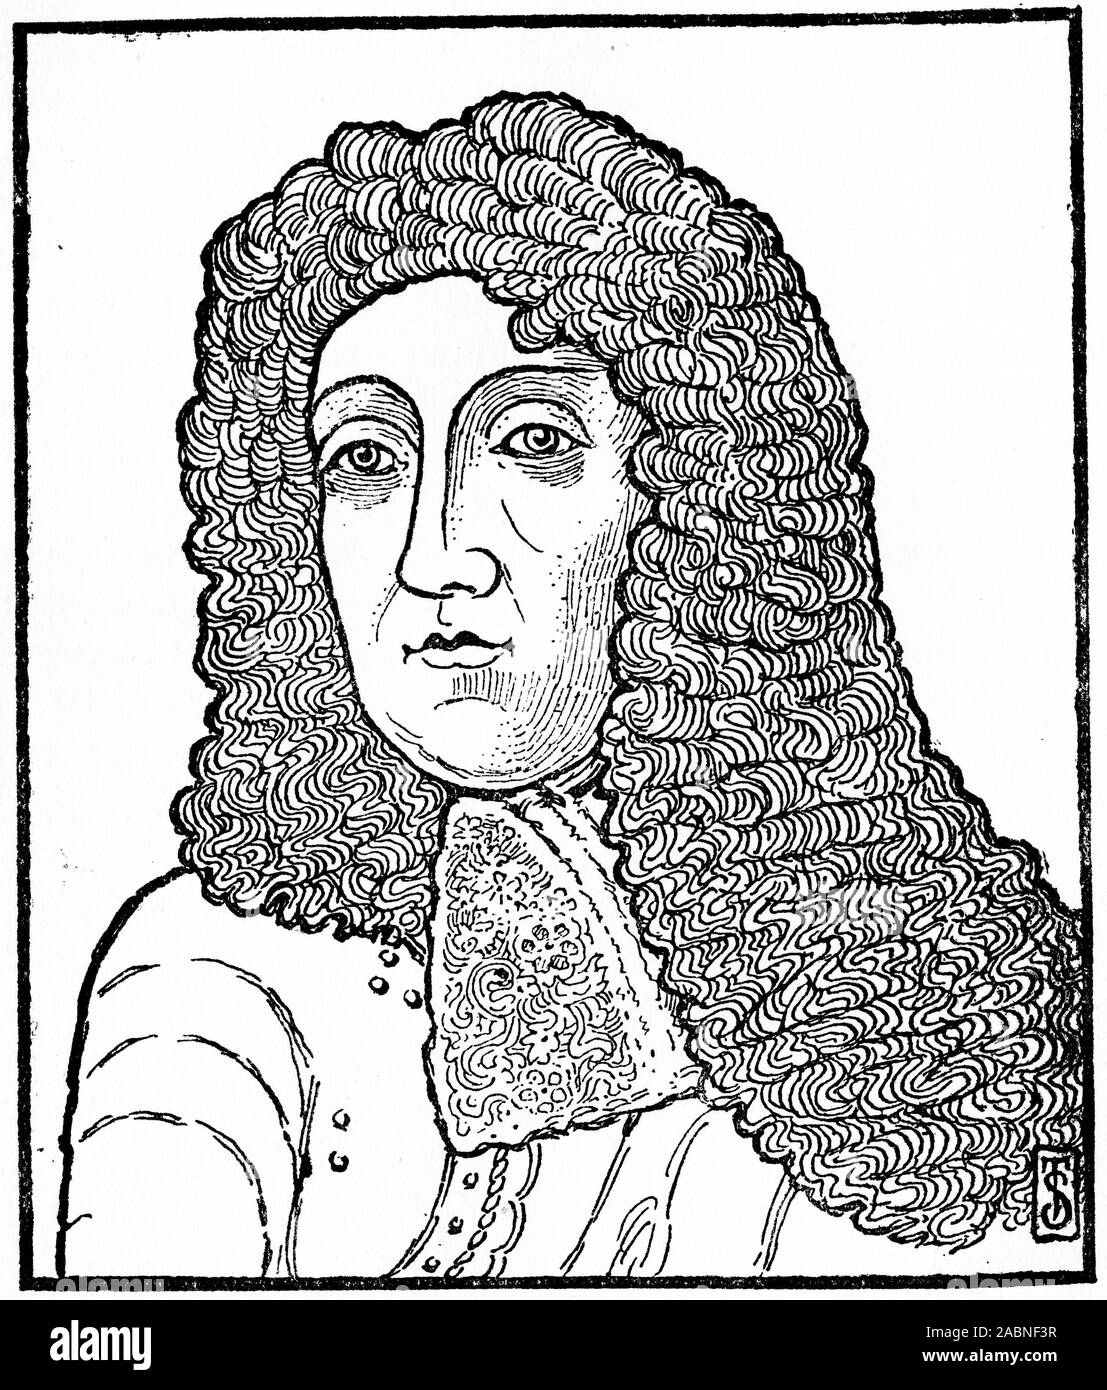 Engraved portrait of the Duke of York, AKA James II and VII ( 1633 – 1701)  King of England and Ireland as James II and King of Scotland as James VII, from  1685 until he was deposed in the Glorious Revolution of 1688. The last Roman Catholic monarch of England, Scotland and Ireland, his reign is now remembered primarily for struggles over religious tolerance. Stock Photo